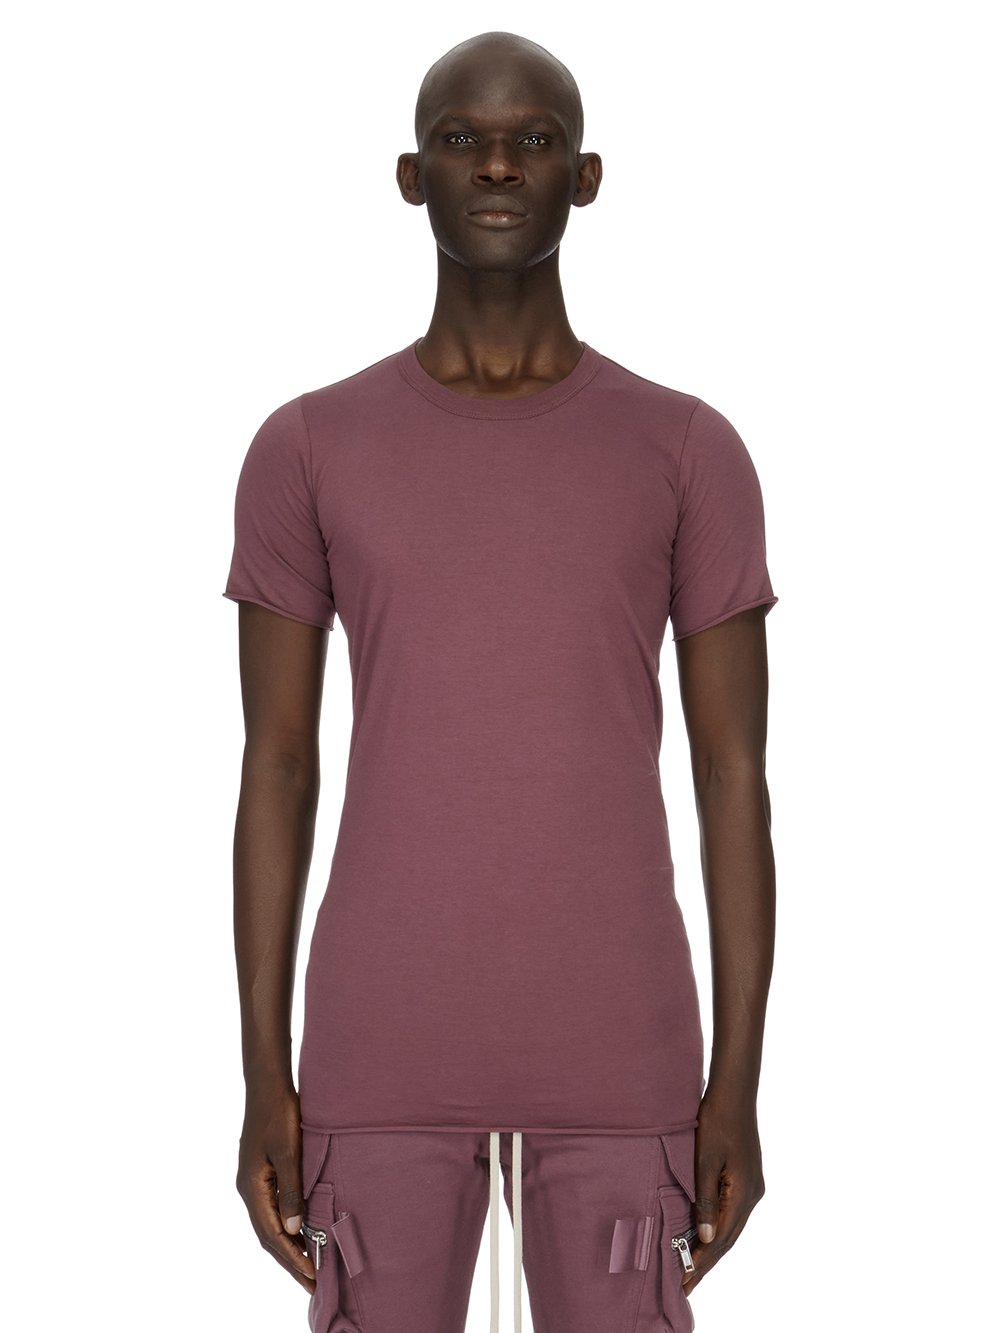 RICK OWENS FW23 LUXOR BASIC SS T IN AMETHYST CLASSIC COTTON JERSEY